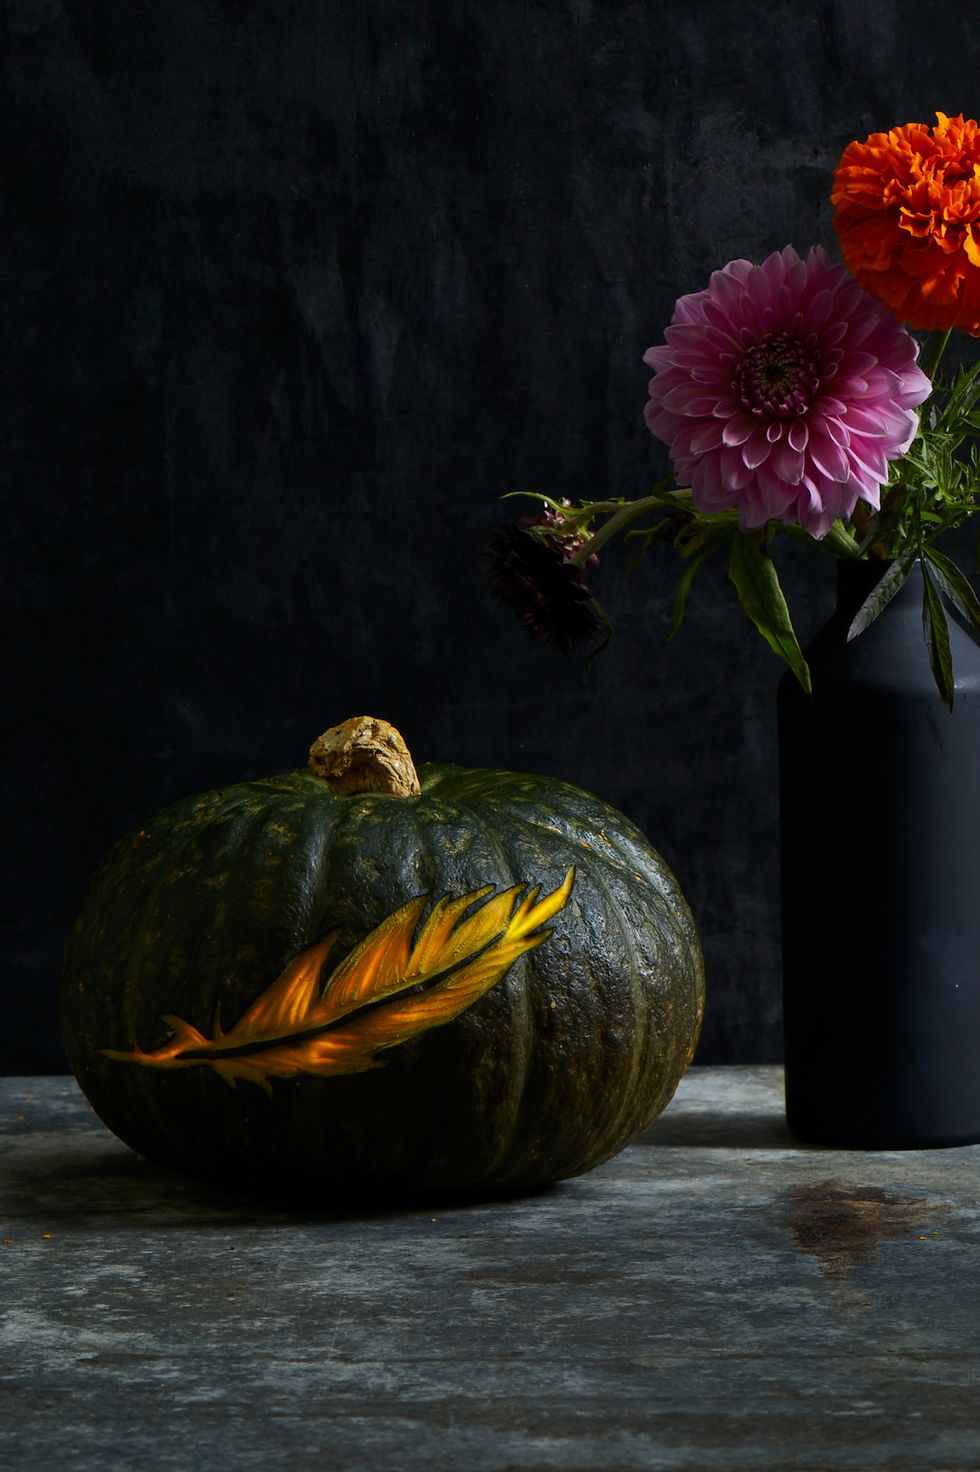 pumpkin carving ideas, dark pumpkin with a feather carving in the center